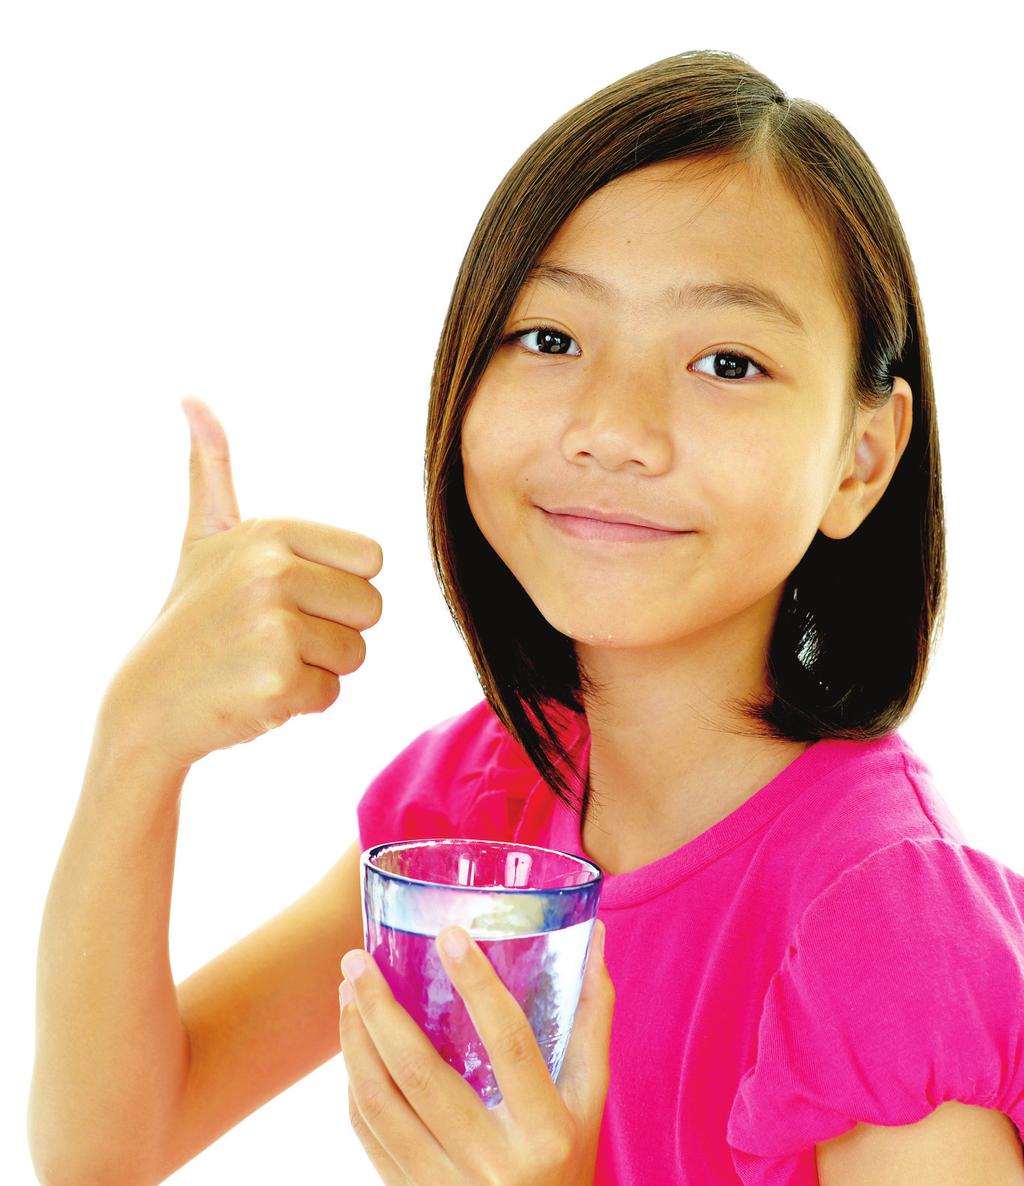 There s added sugar in many drinks. Kids don t need added sugar. Sugary drinks or sugar-sweetened beverages are any drinks that contain added sugar. Often, they have little or no nutritional value.